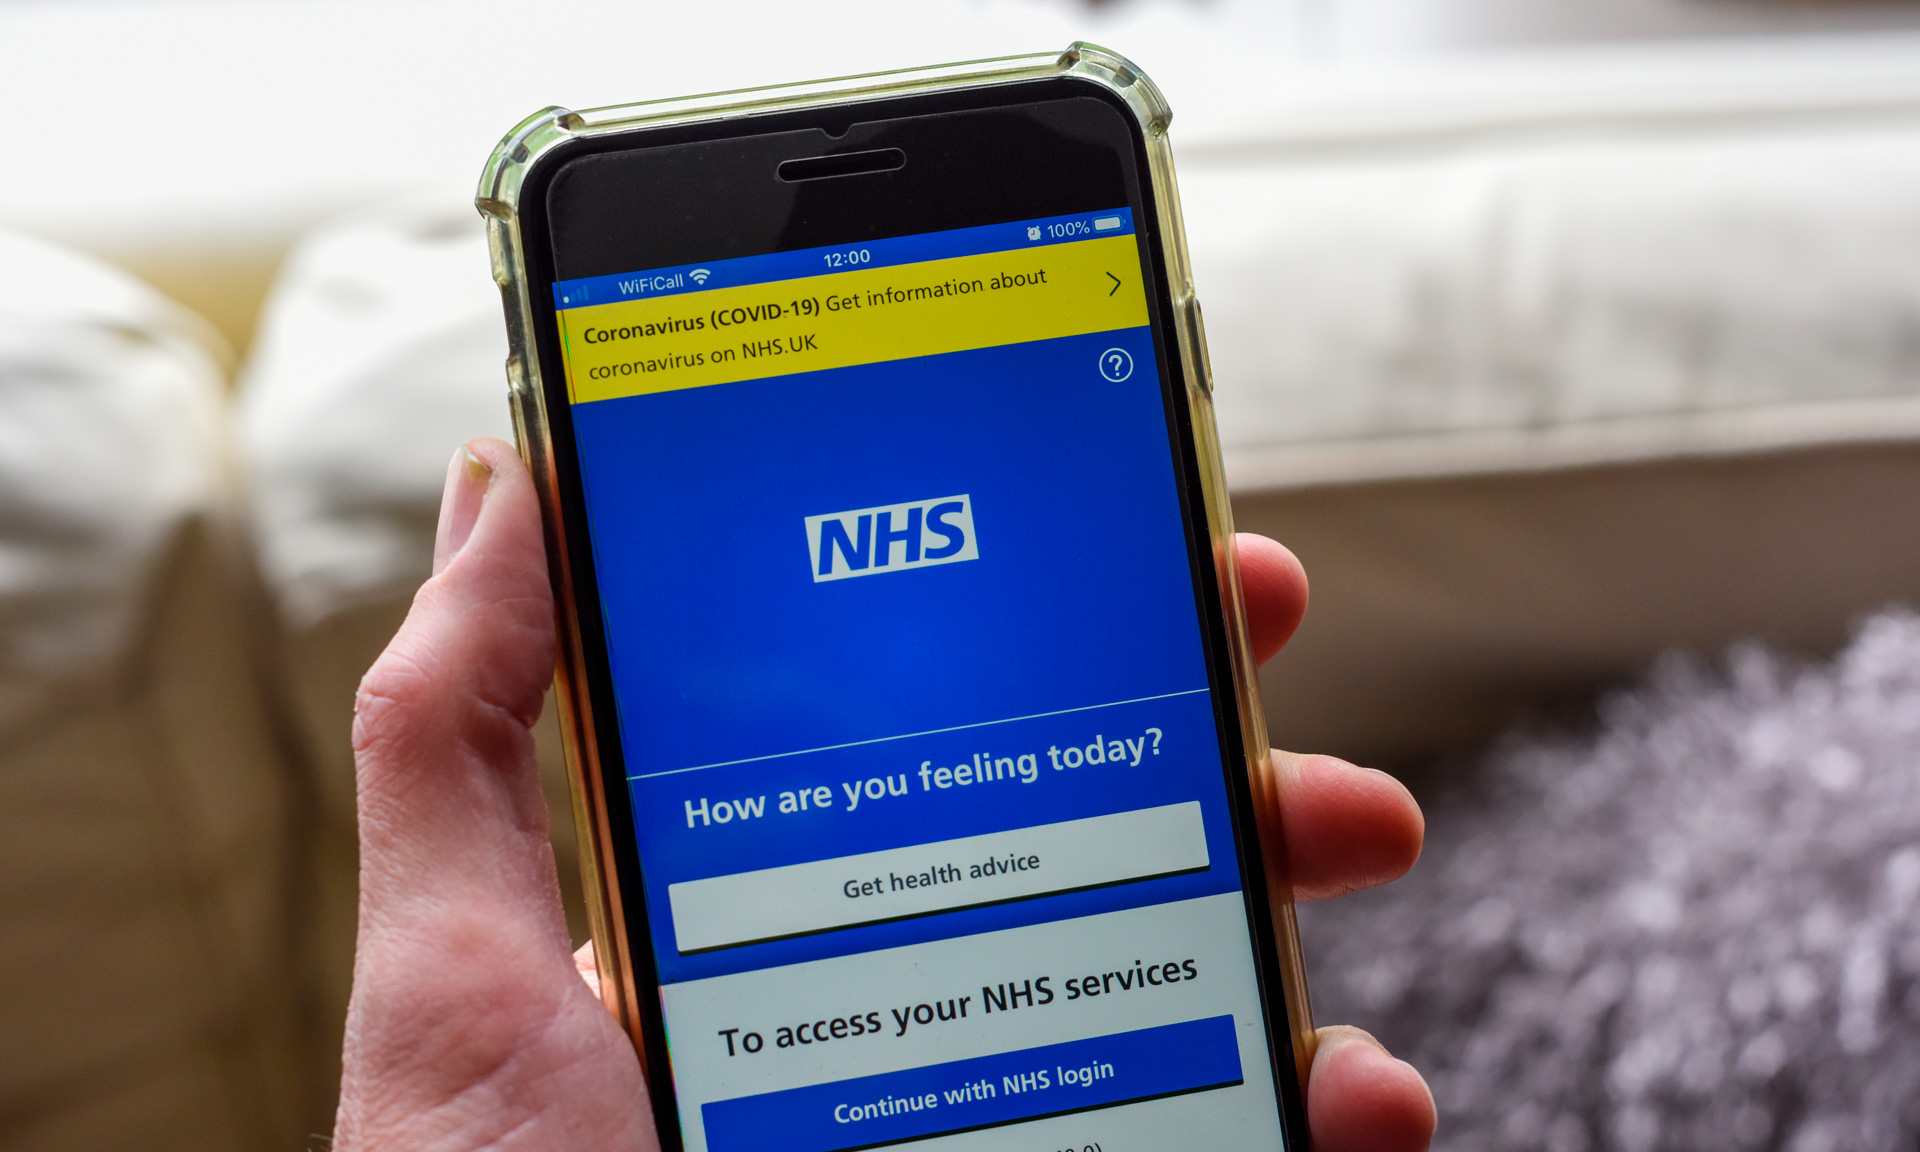 Photo of smartphone showing NHS app homescreen